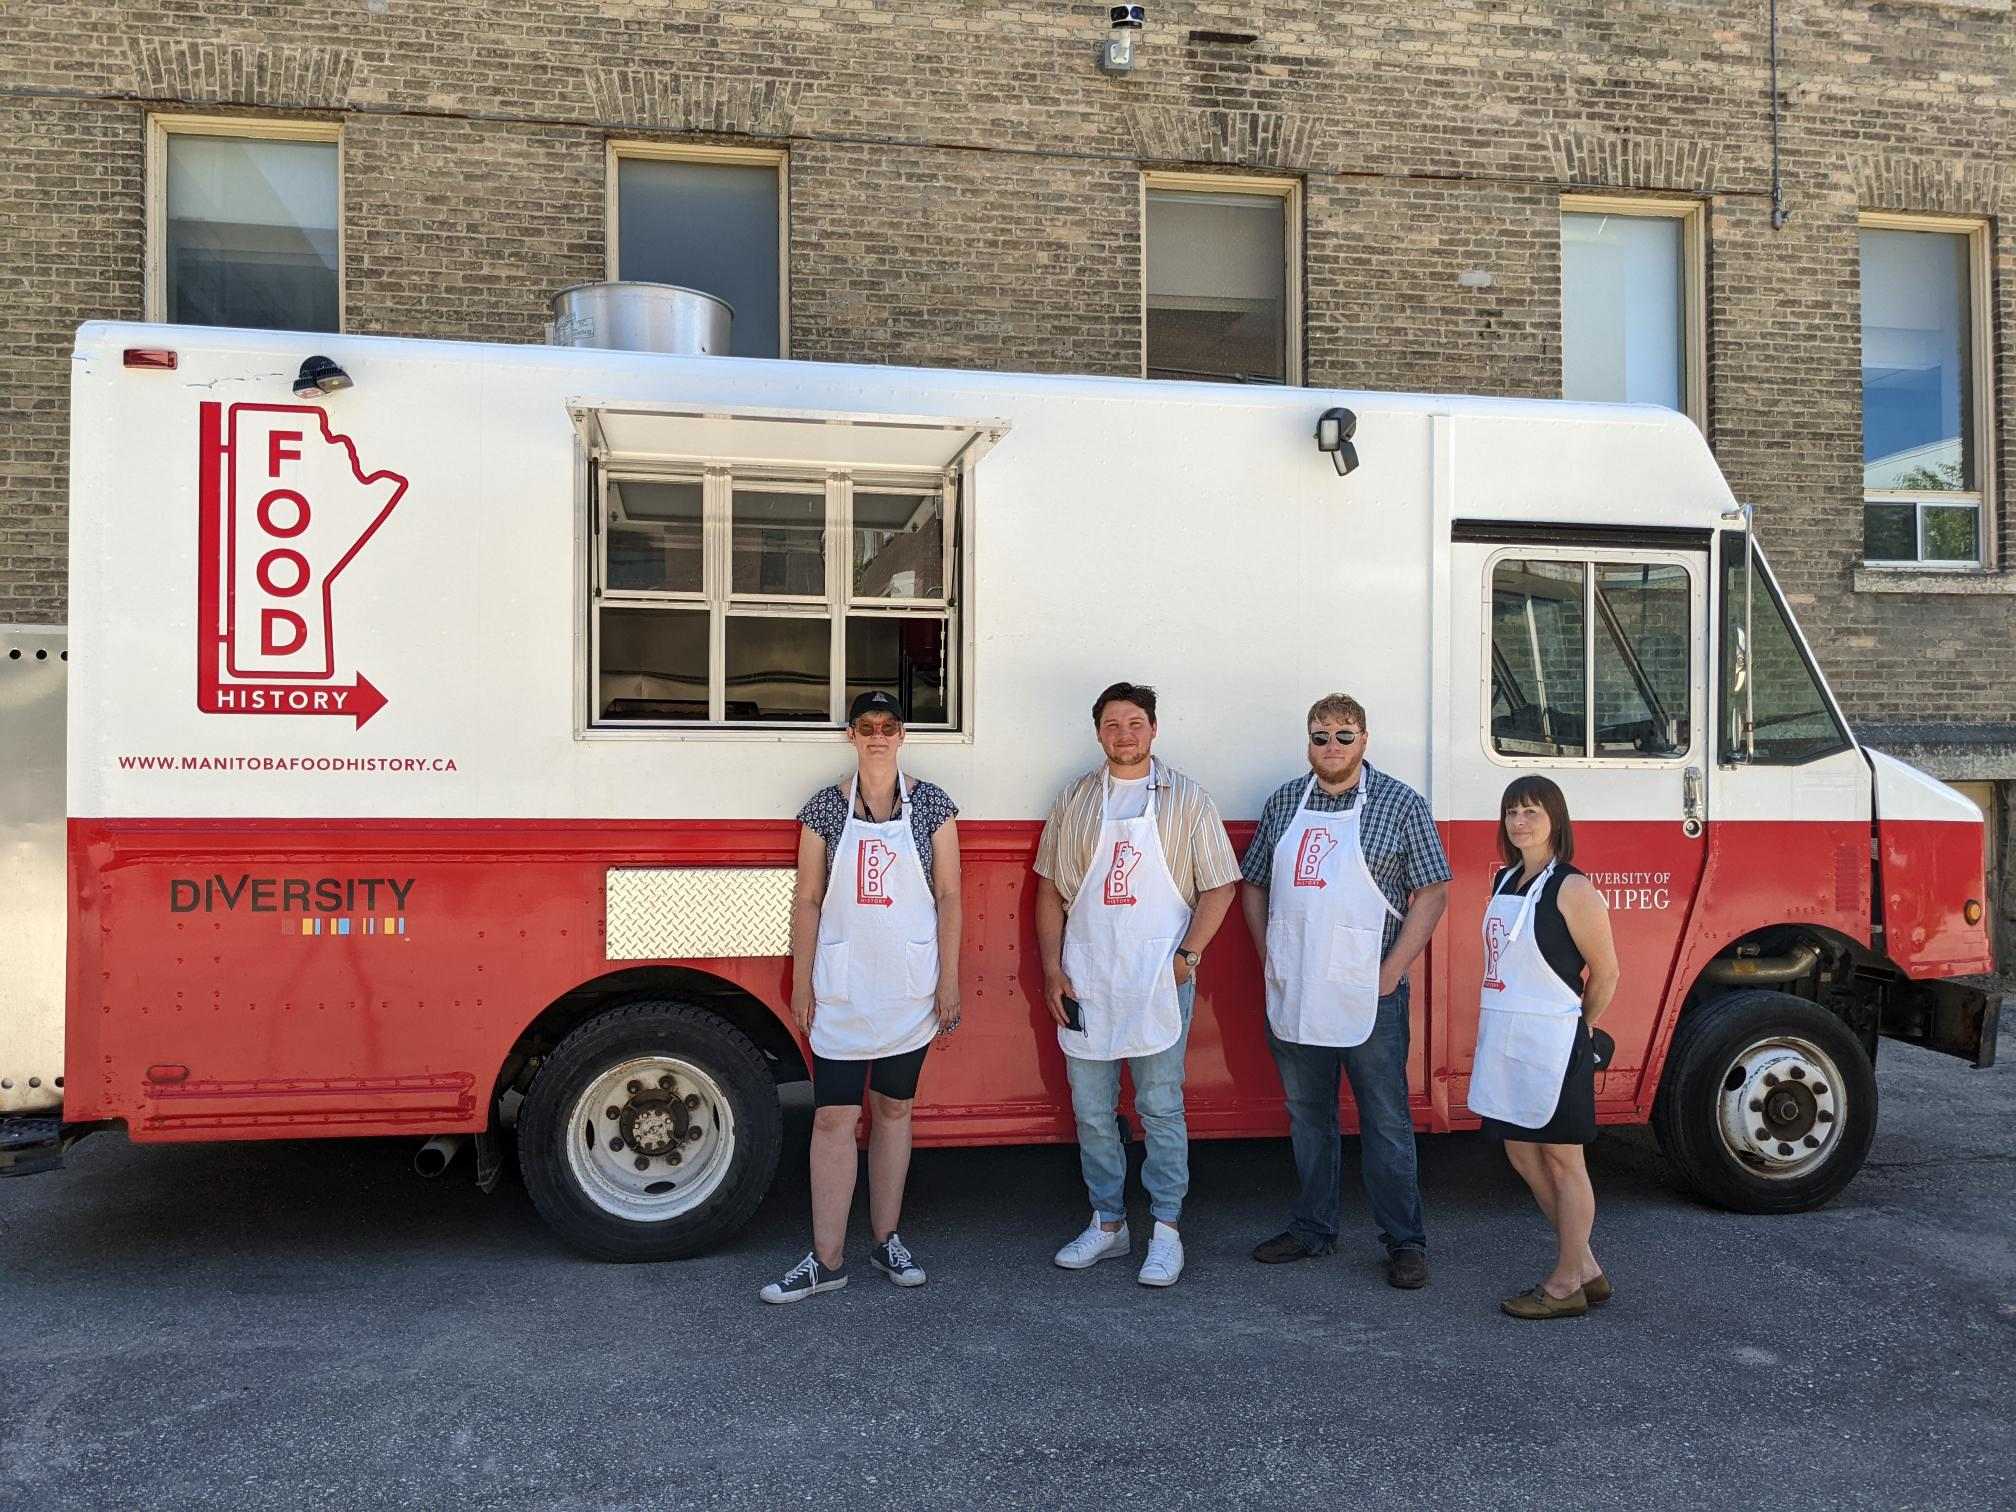 Daniel (second from the left) is pictured in front of the Manitoba Food History Project’s food truck with the other team members: Dr. Janis Thiessen (far left), Kent Davies (second from the right), and Kimberly Moore (far right).